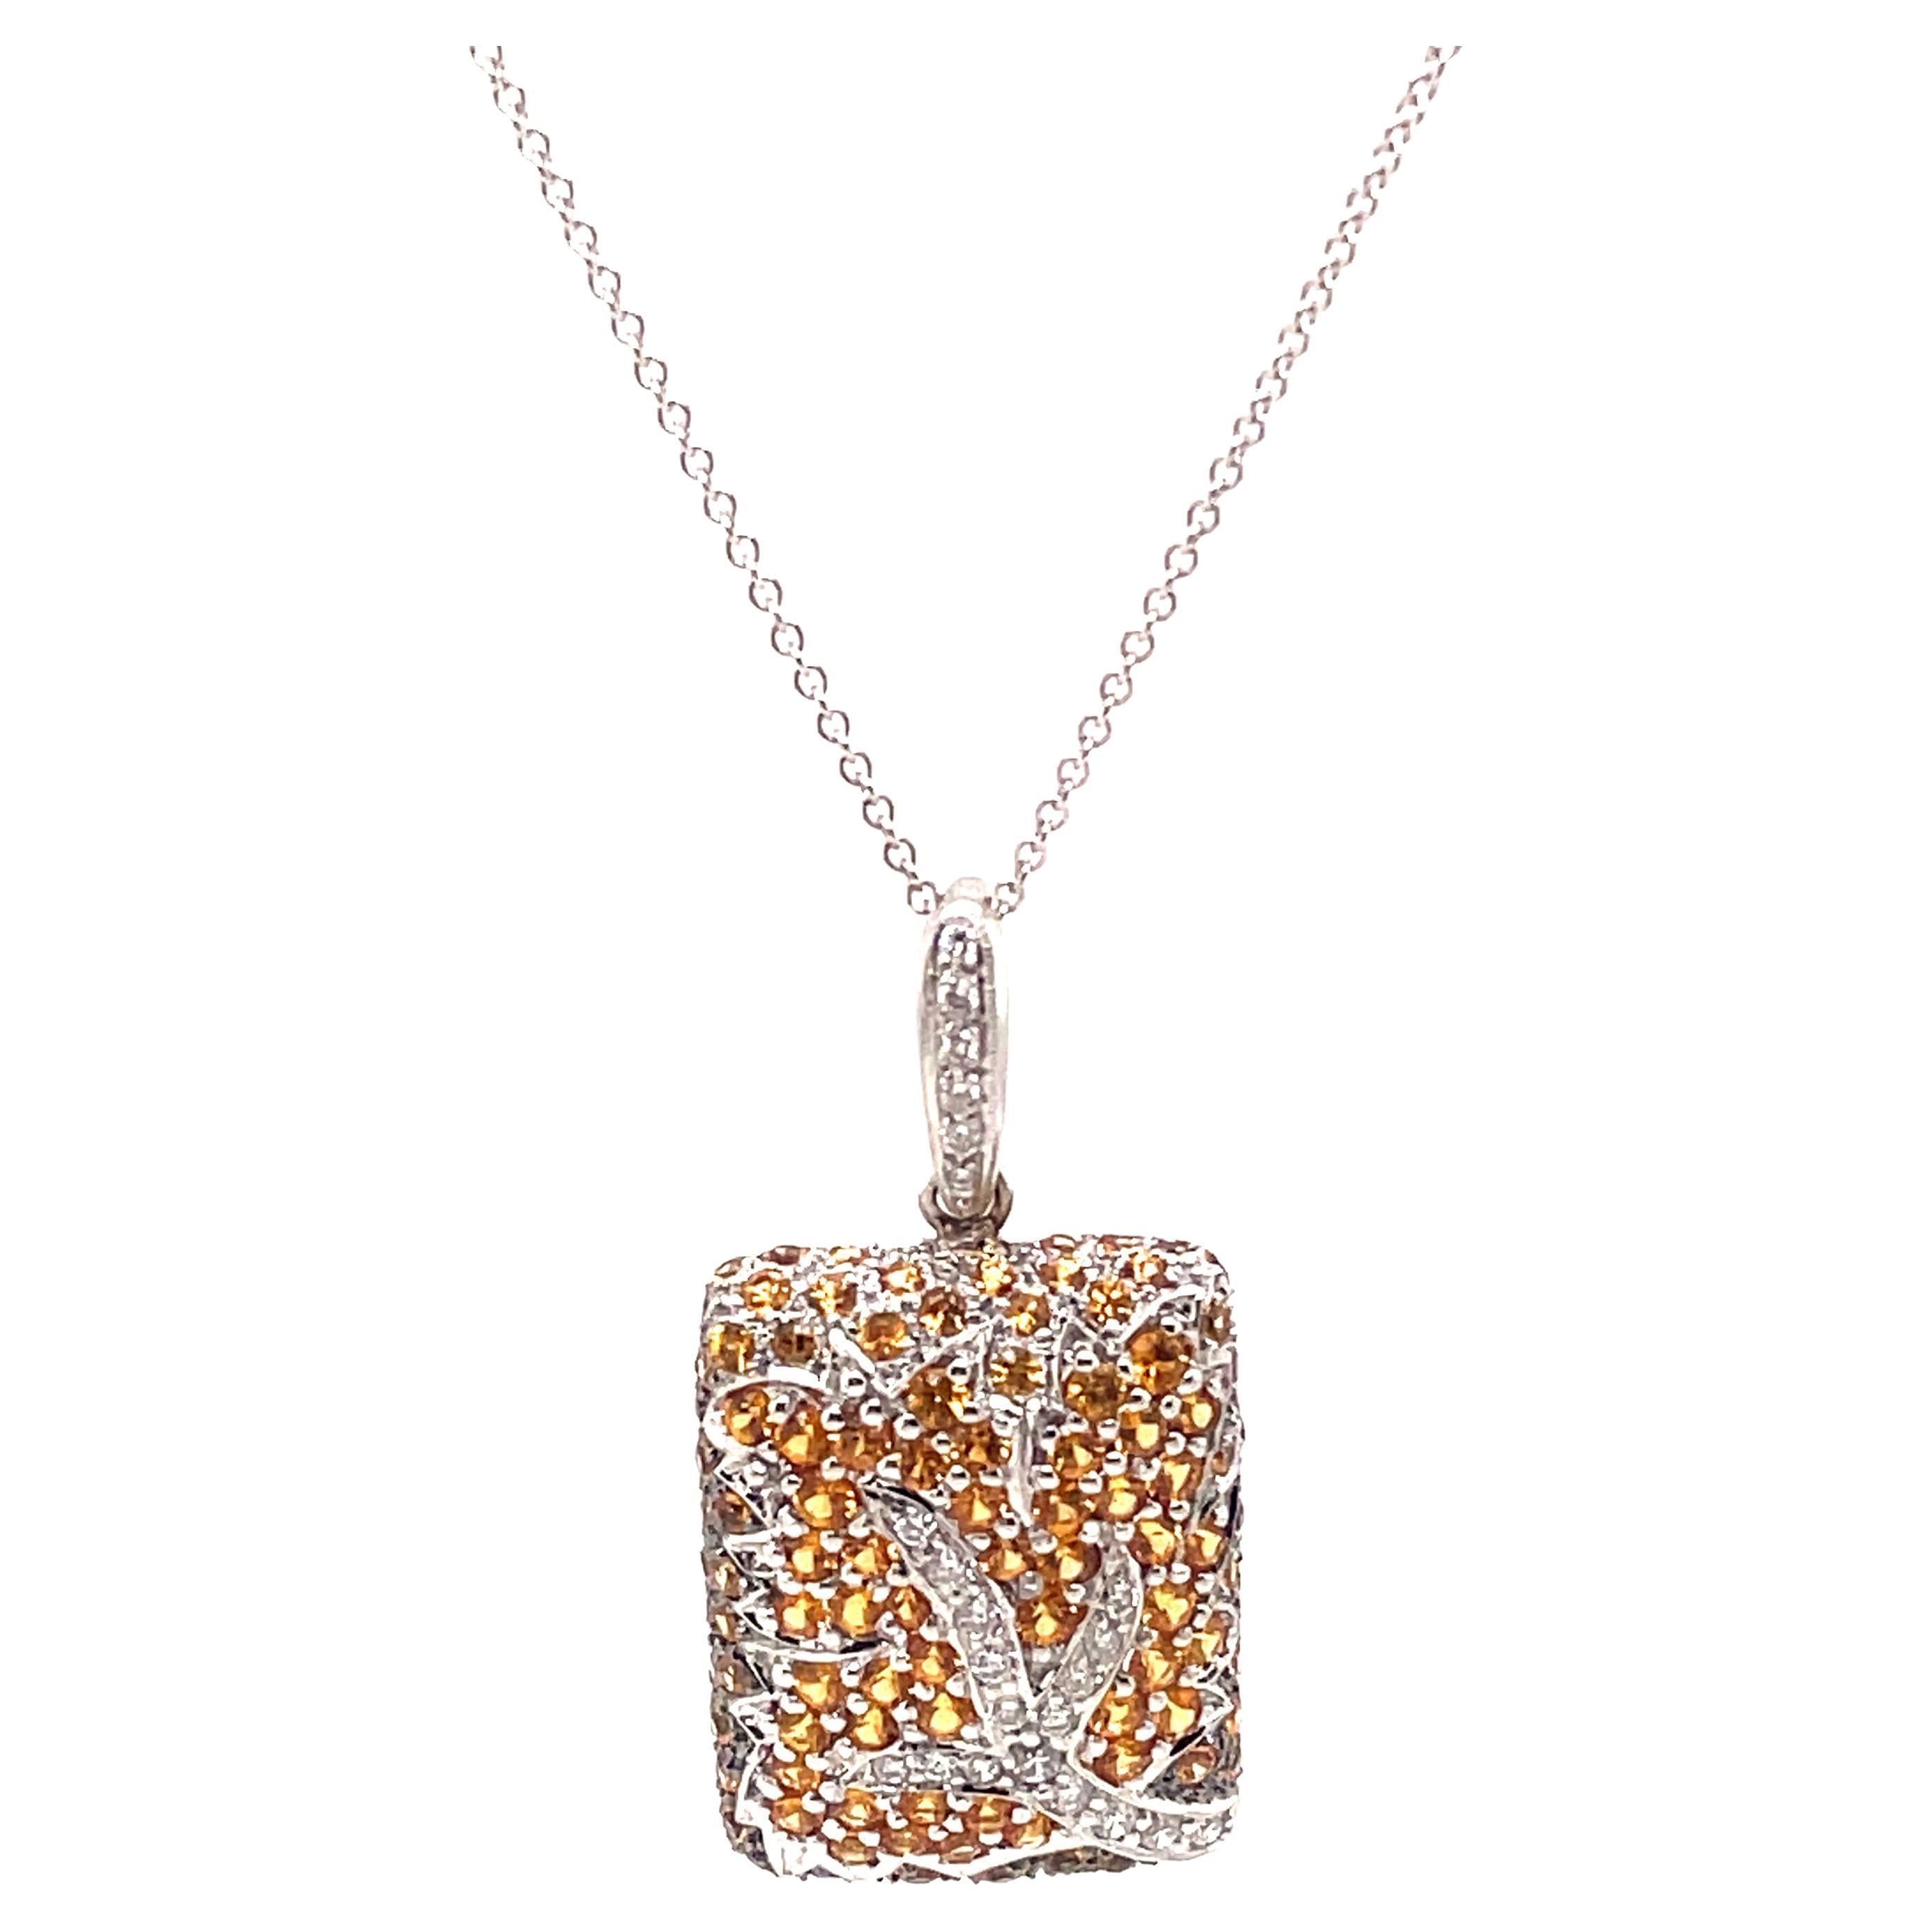 5.28 Yellow Sapphire with Diamond Tree Inspired Pendant Necklace 18k White Gold